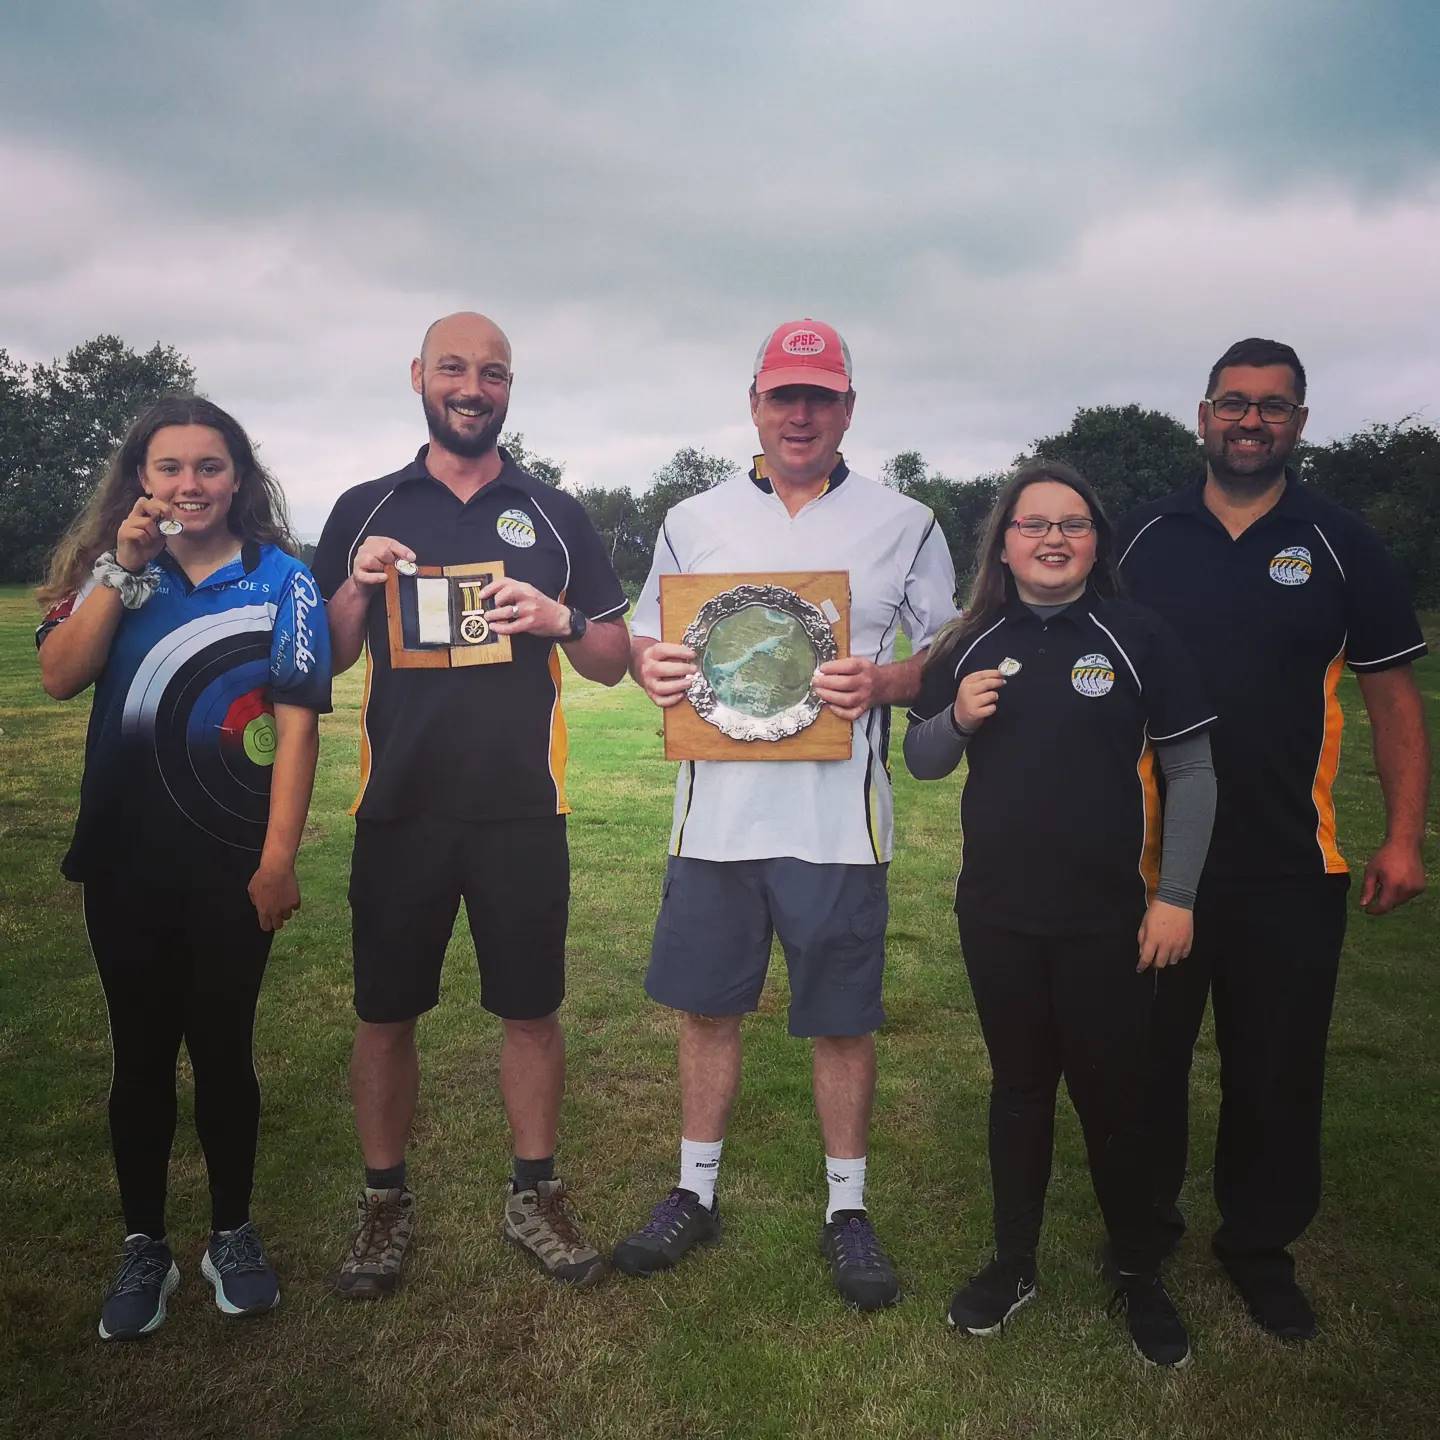 Team B.O.W smashed it again today at the DCAS Championships at Exmouth Archers. Chloe and Andrew Scott, Saffron Knowles and Rob Williams all coming away as DCAS Champions in their respective categories. Well done everyone!